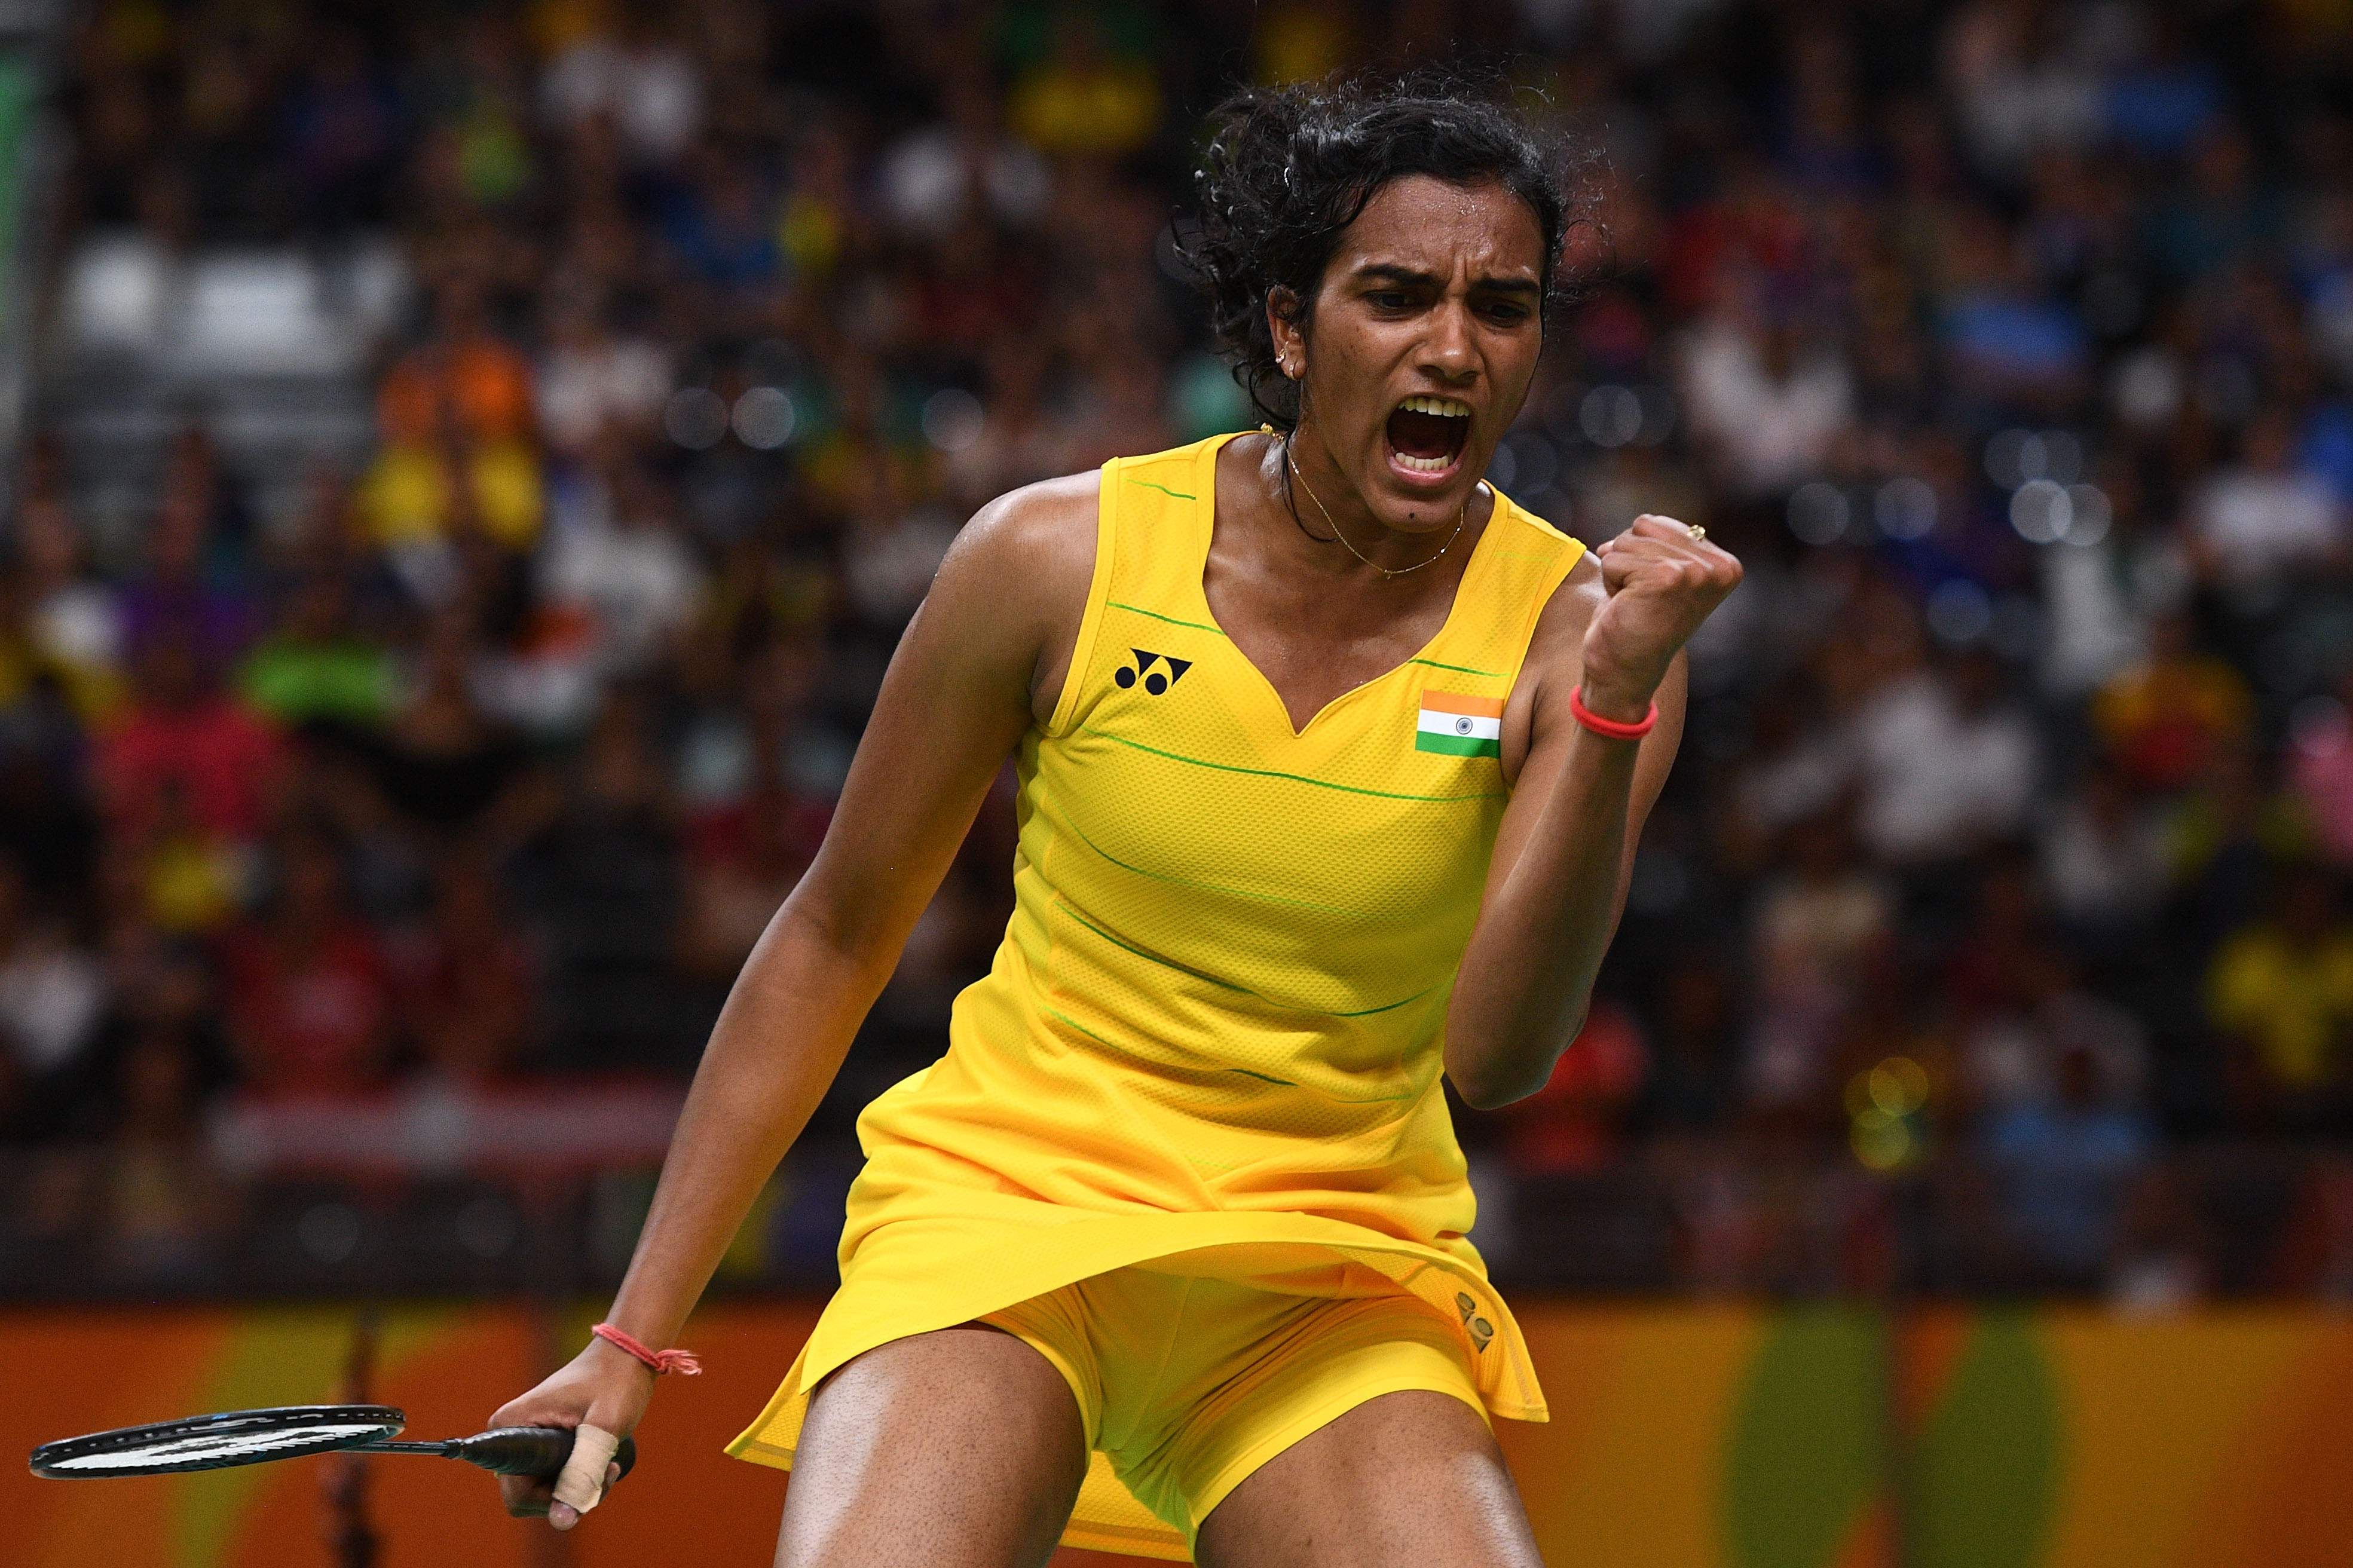 I hope to be the champion one day, reveals disappointed PV Sindhu